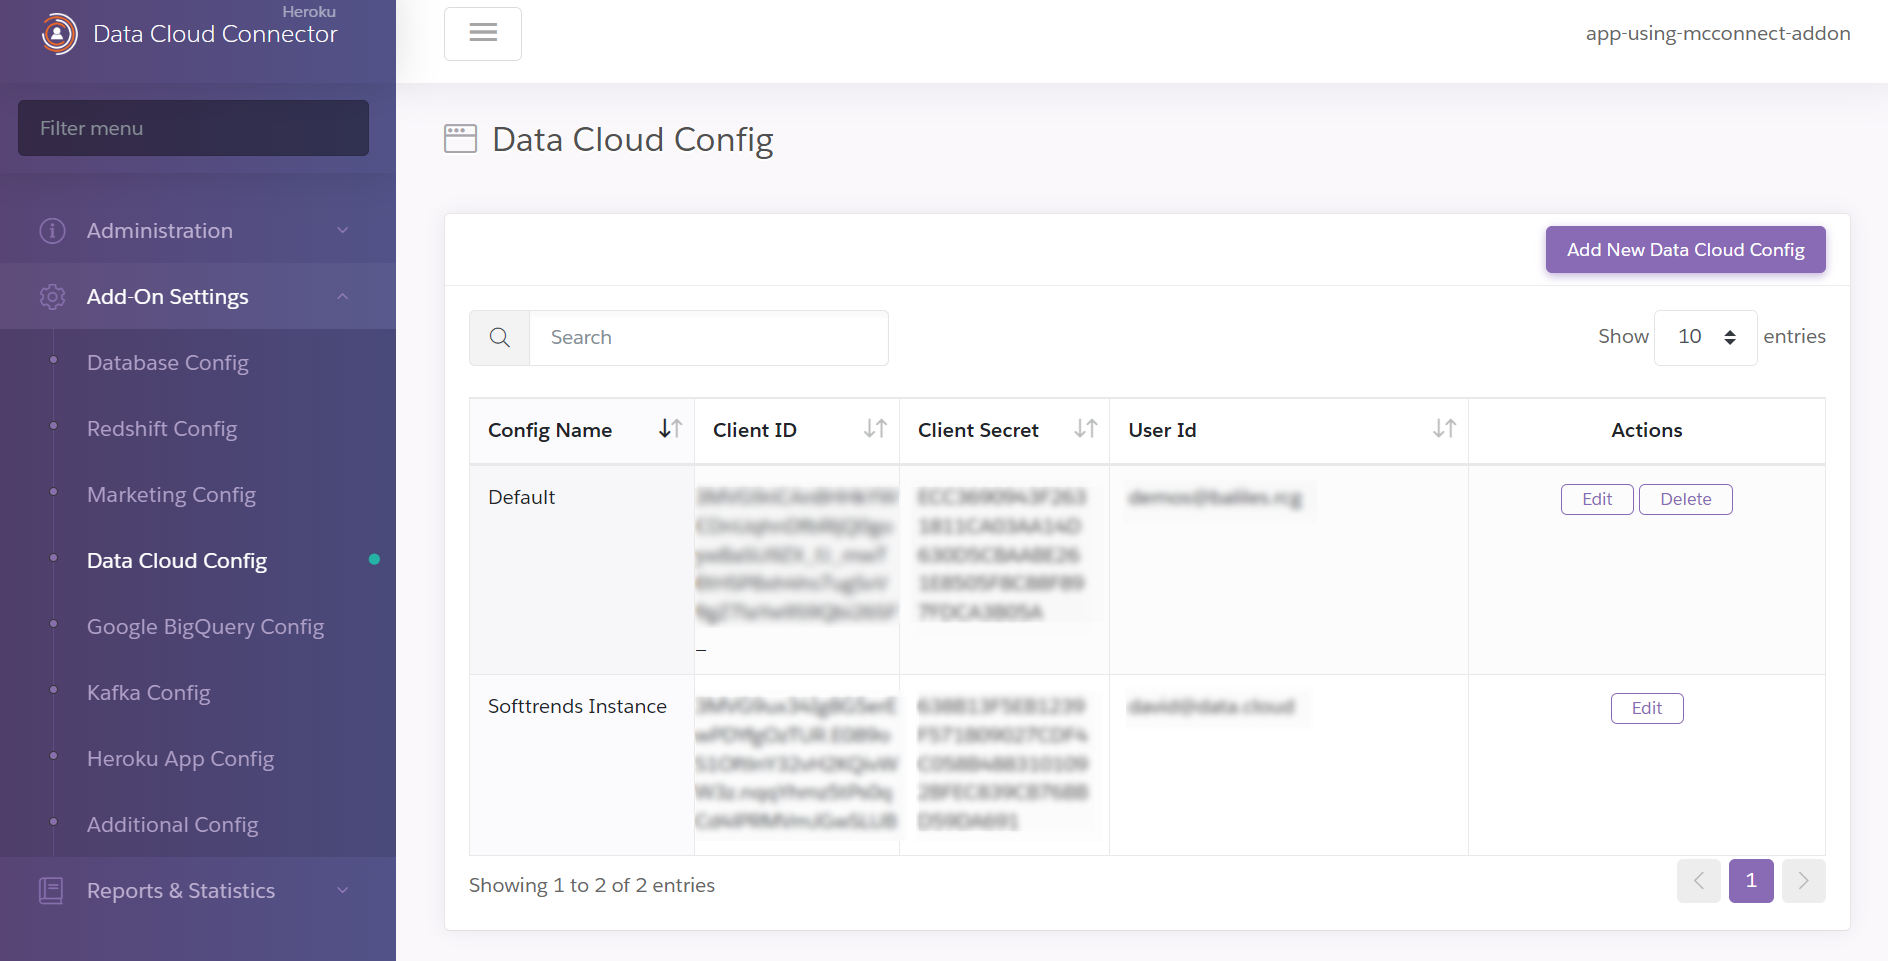 A screenshot of the Data Cloud Configuration page showing a list of configurations with the option to add additional configurations.